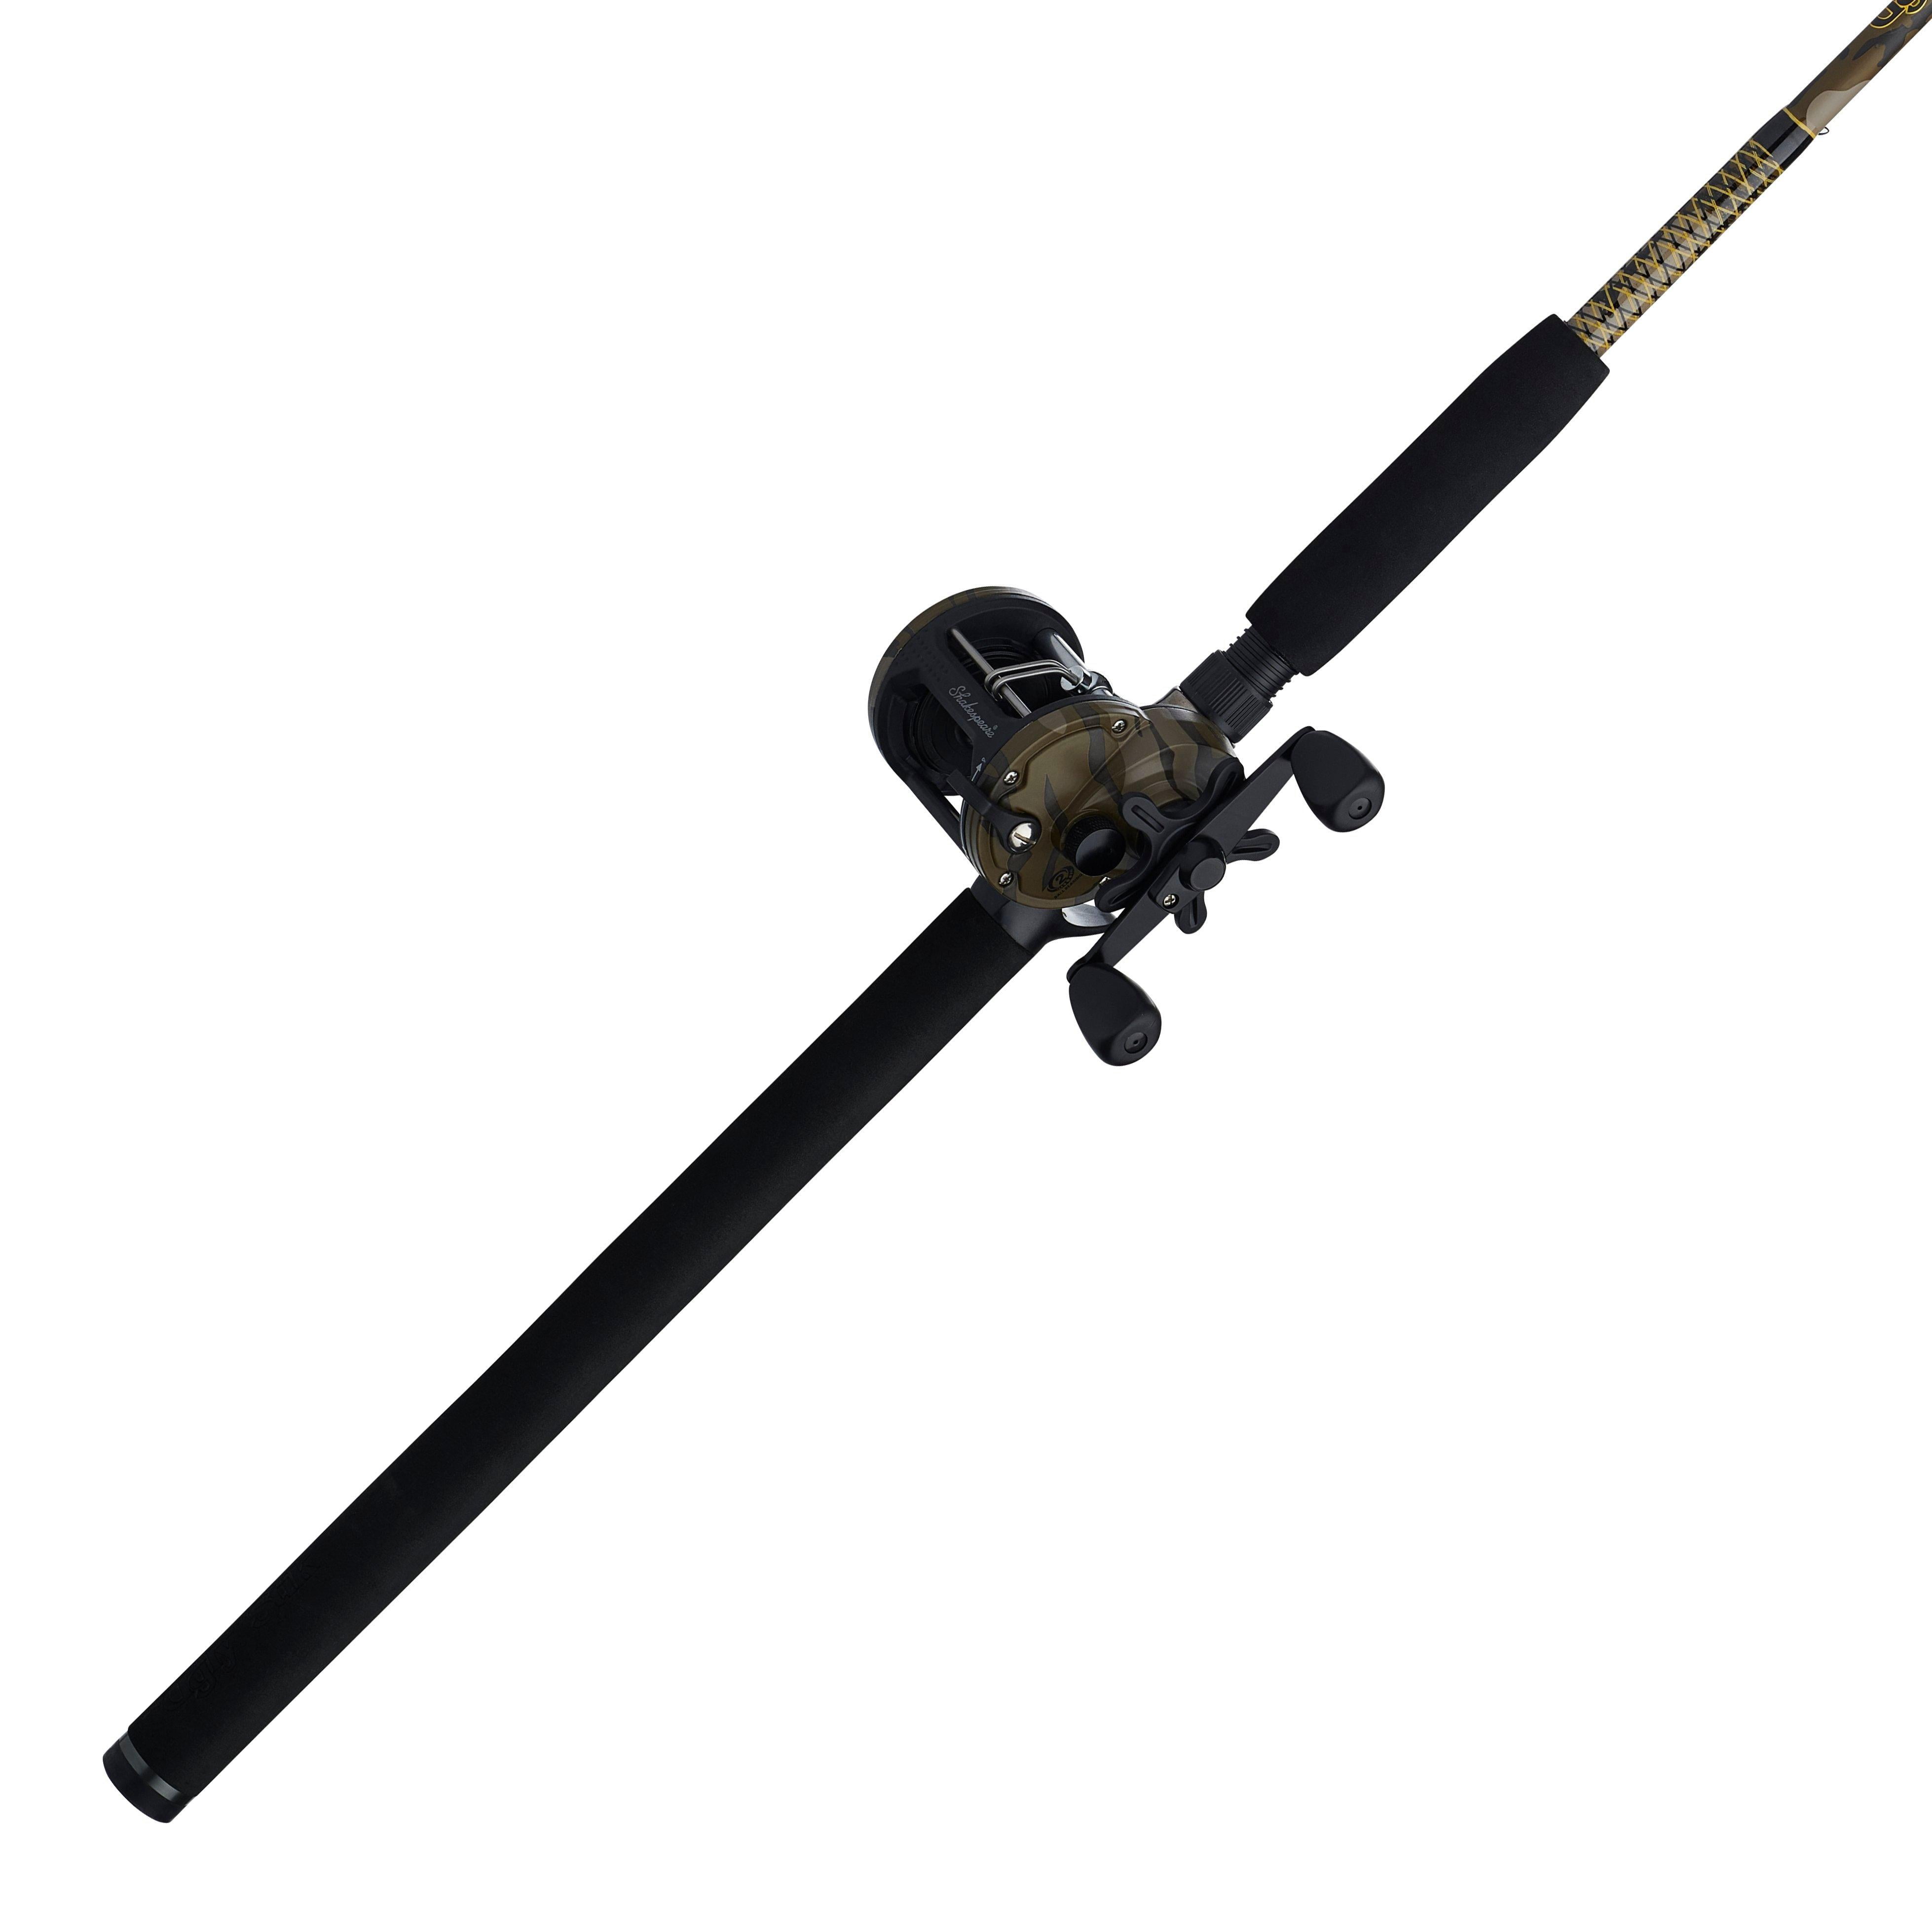 Baitcasting Fishing Rod Bass Pro Shops 6'med Action 17lb 2PC AND Reel 